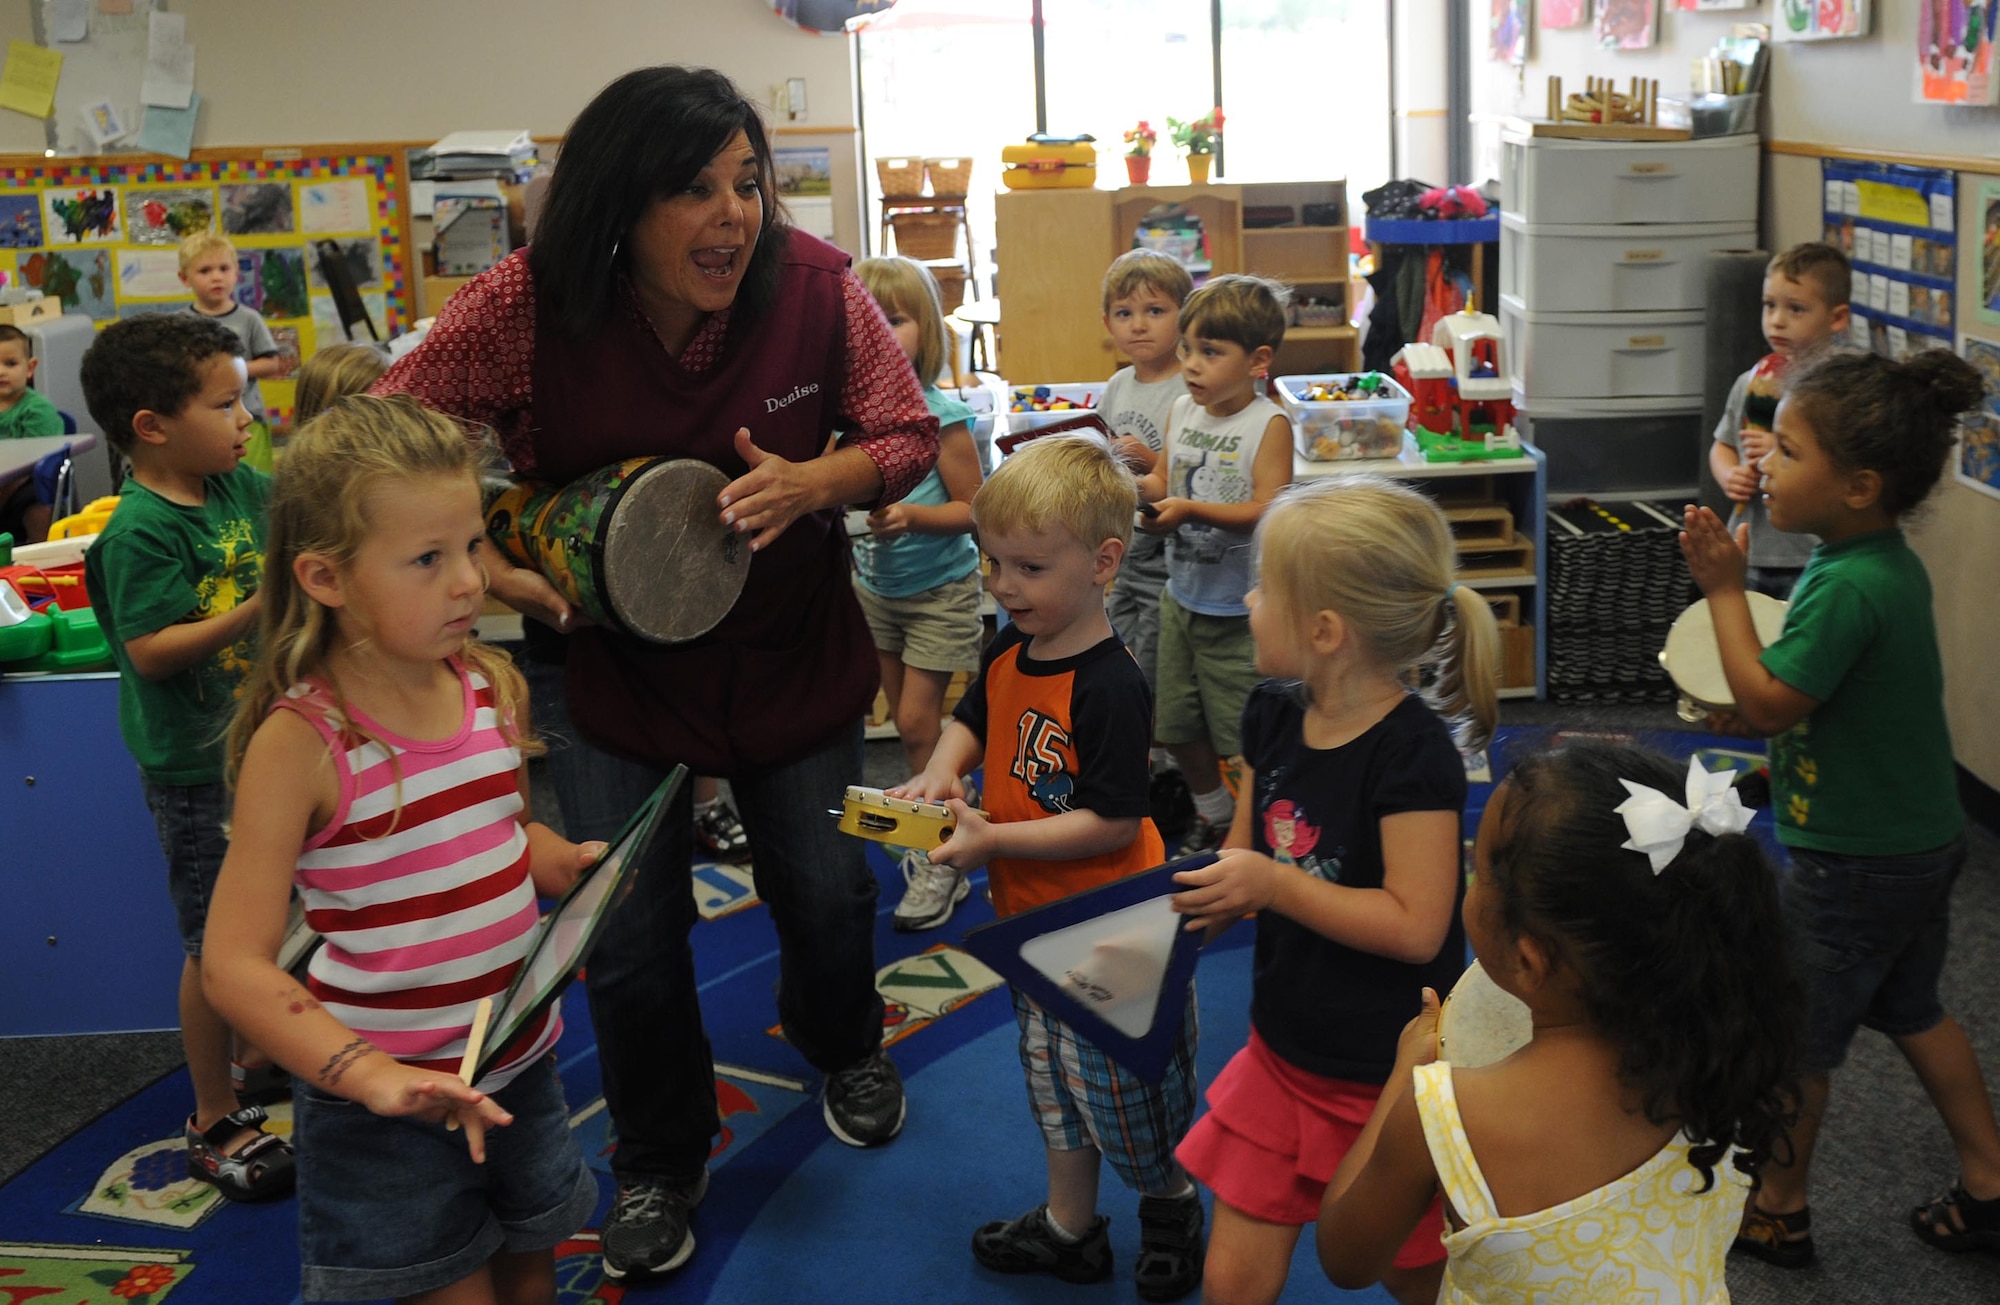 Denise Gregory, a child development program technician, sings and plays instruments with the Pre-K children during the rain dance song July 10, at Little Rock Air Force Base, Ark. The Pre-K class teaches the children to share and play together. (U.S. Air Force photo by Airman 1st Class Ellora Remington)